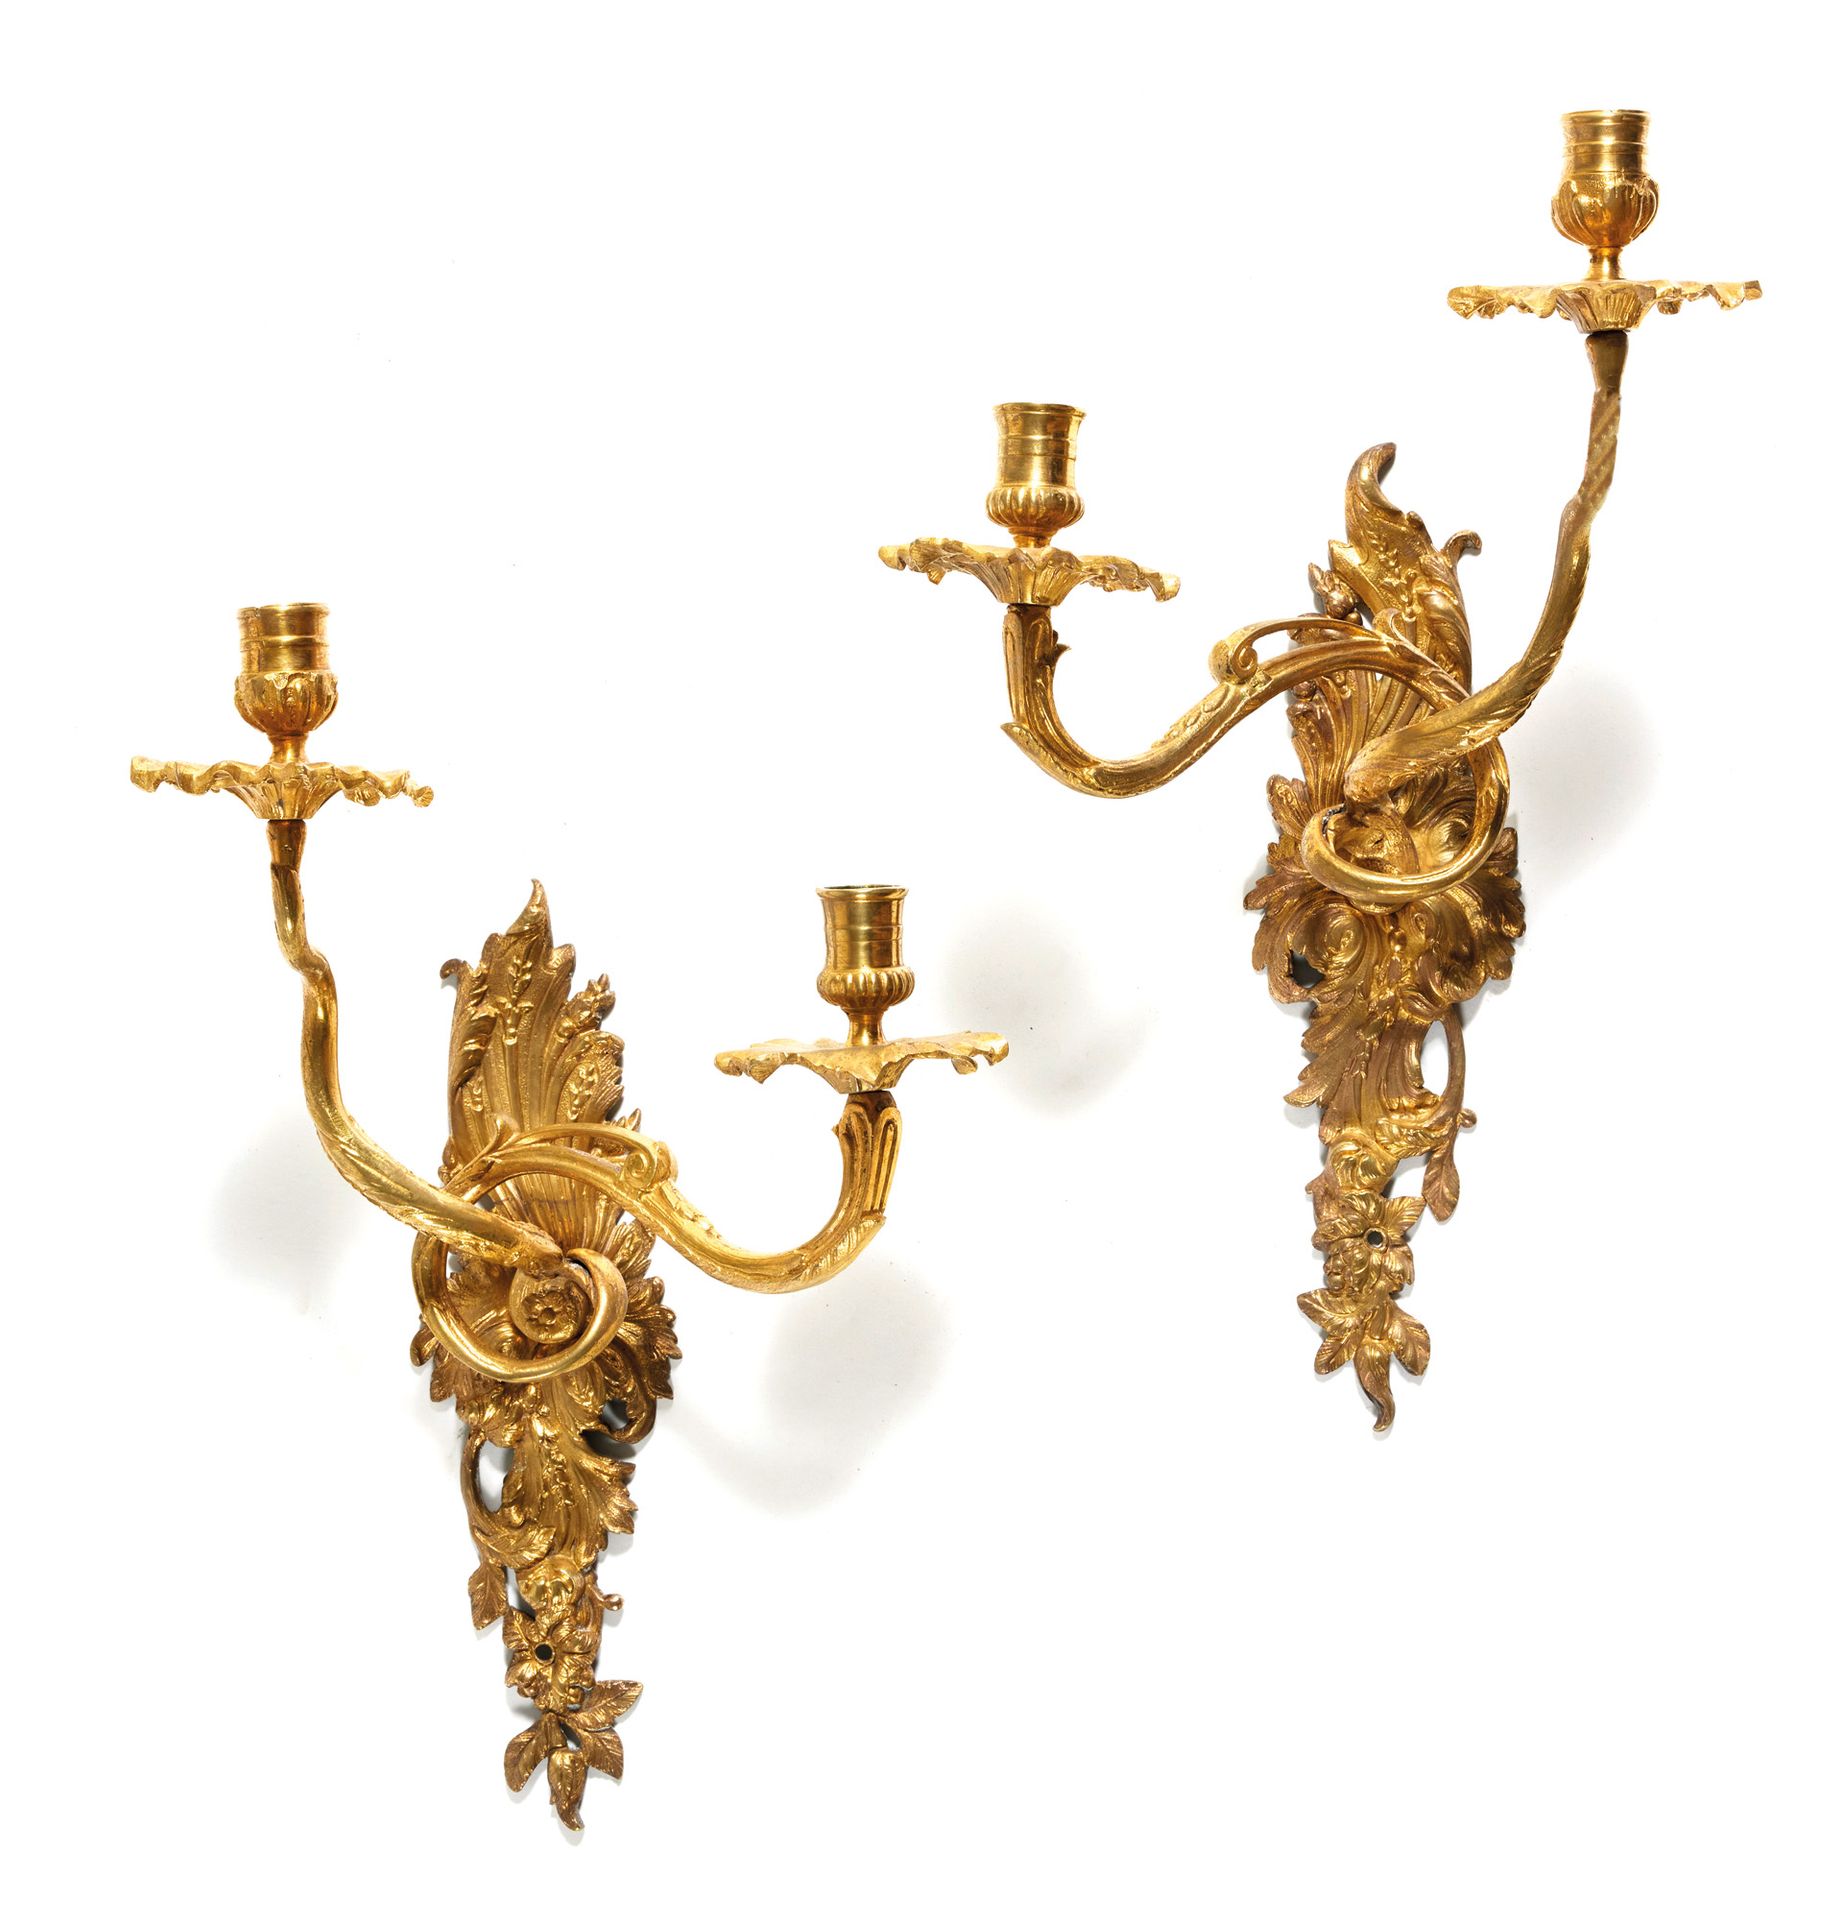 Paire d’appliques Pair of sconces
in chased and gilded bronze with three branche&hellip;